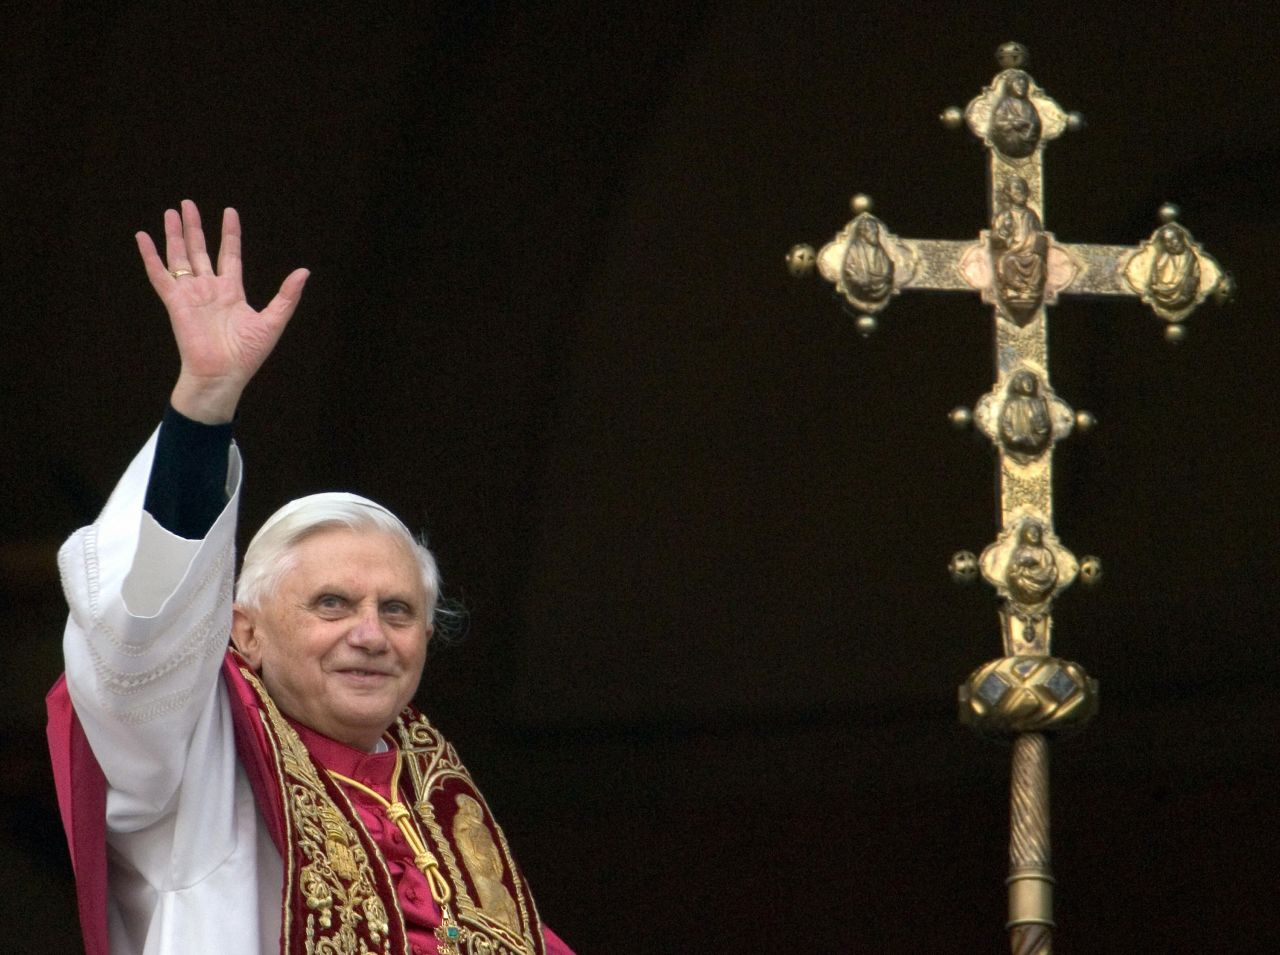 Benedict waves from the main balcony of St. Peter's Basilica after he was elected to be the new pope on April 19, 2005.